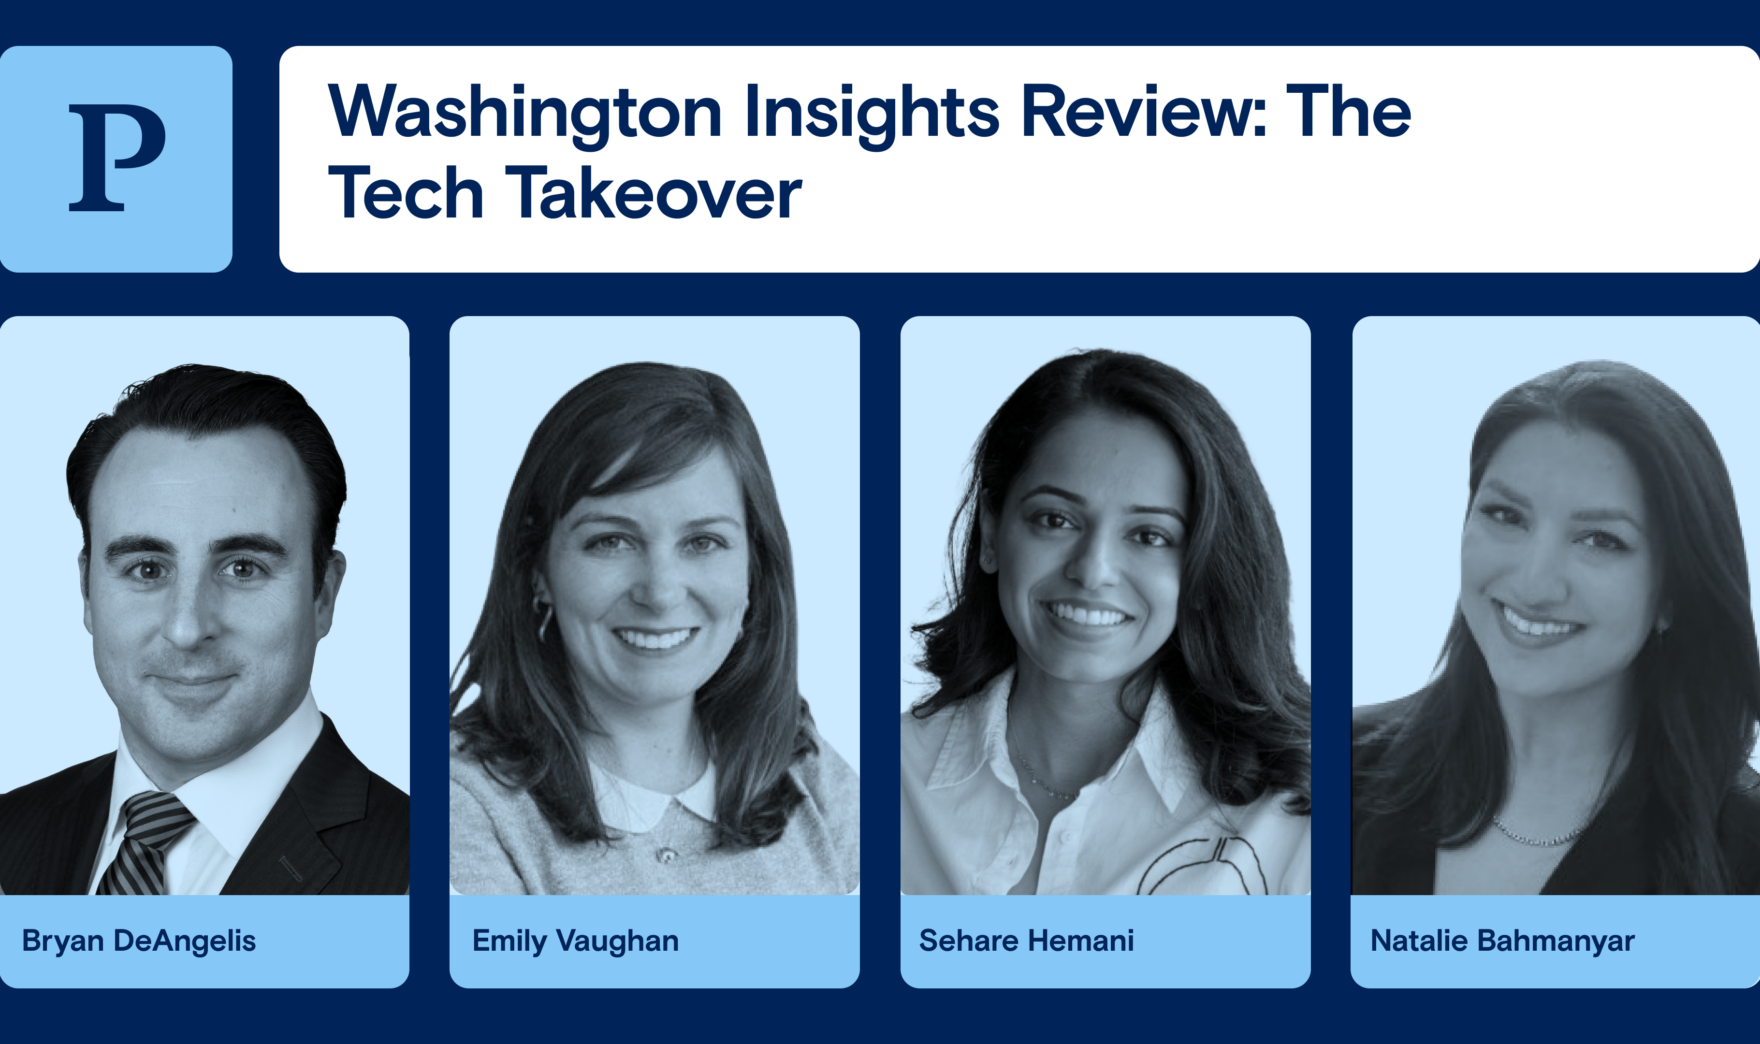 The Washington Insights Review: The Tech Takeover